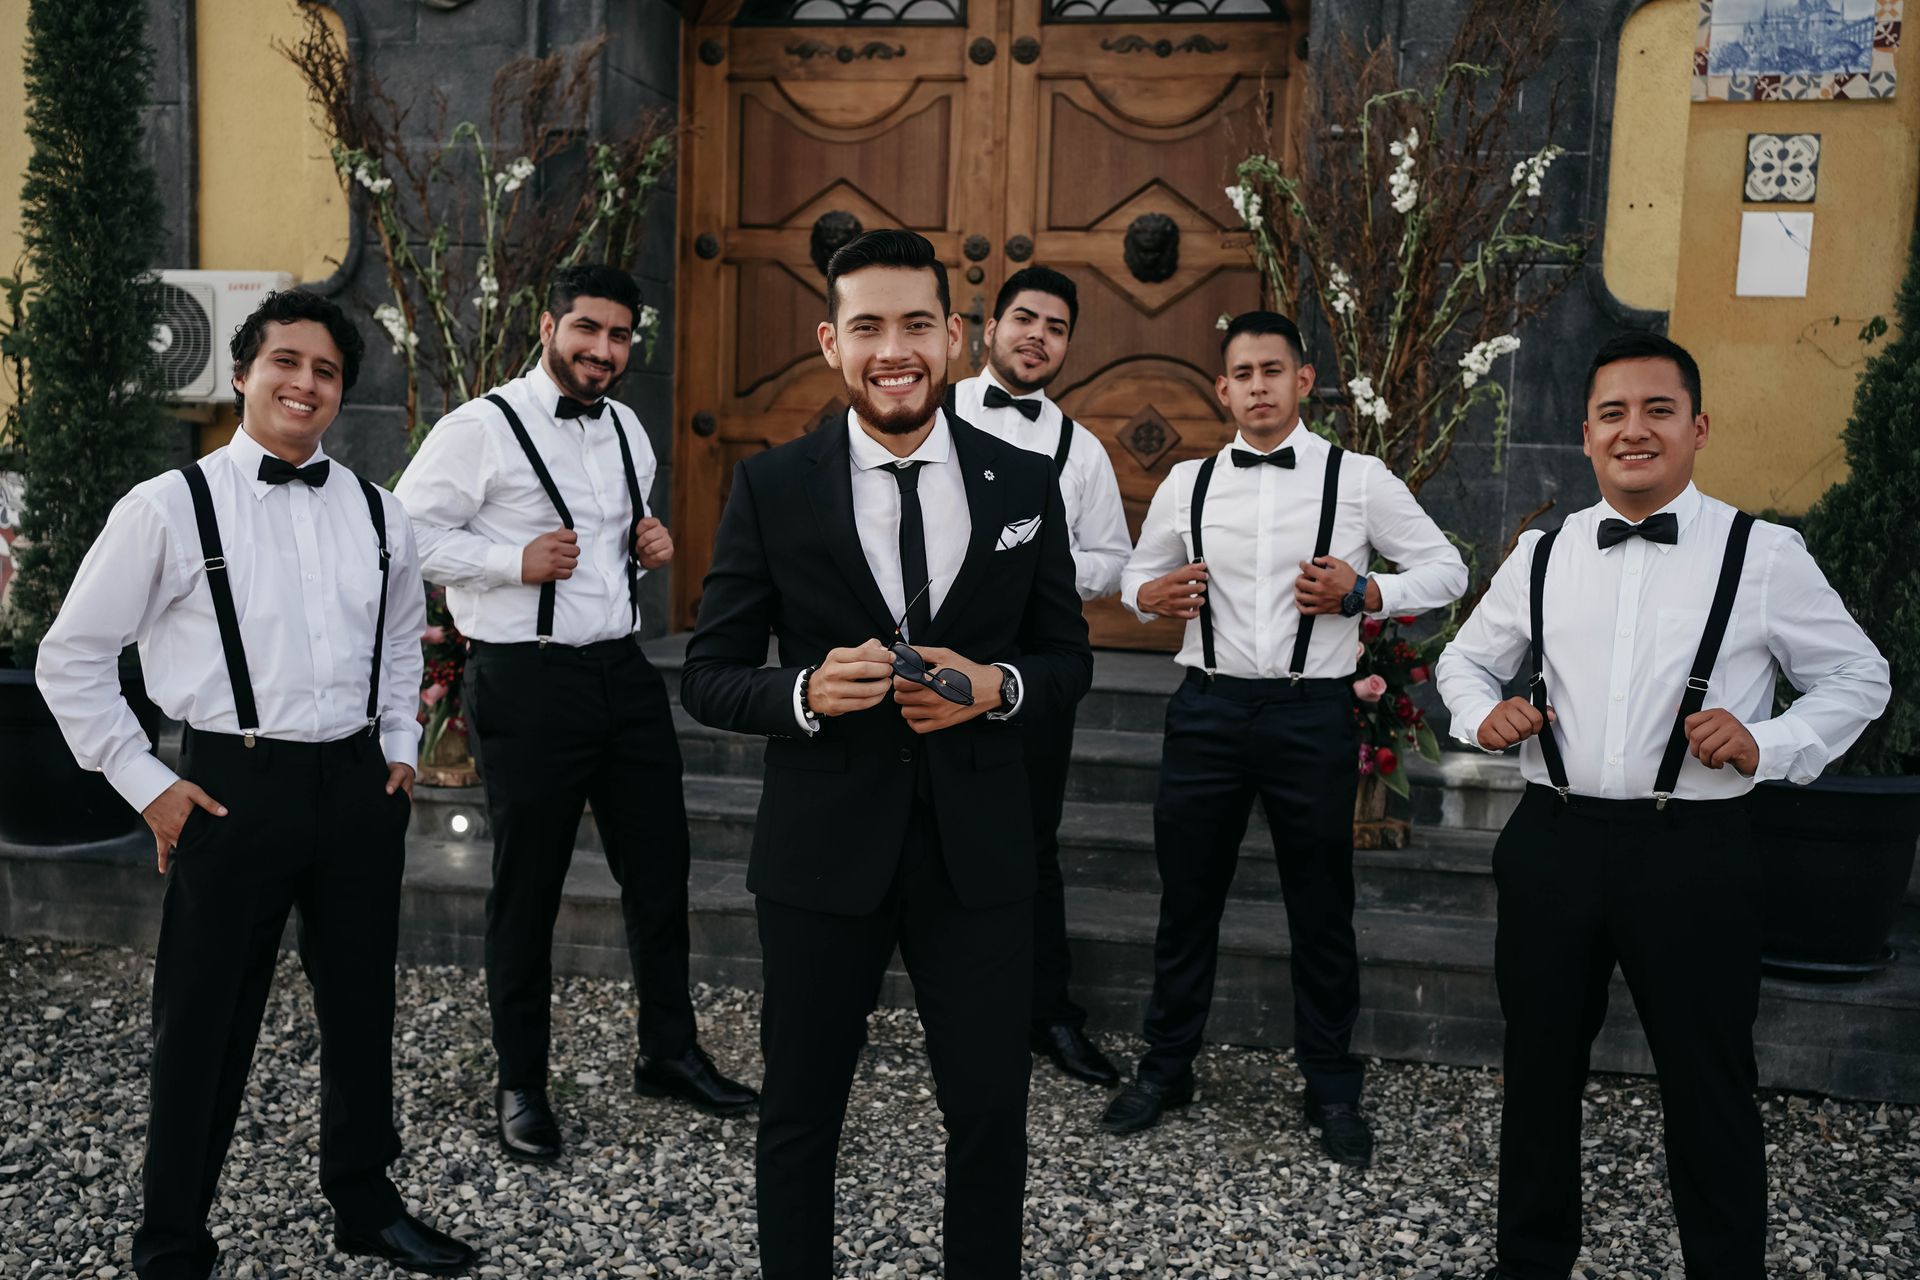 The groom with his best man and groomsmen at Flash Party Photo Booth rental in San Antonio